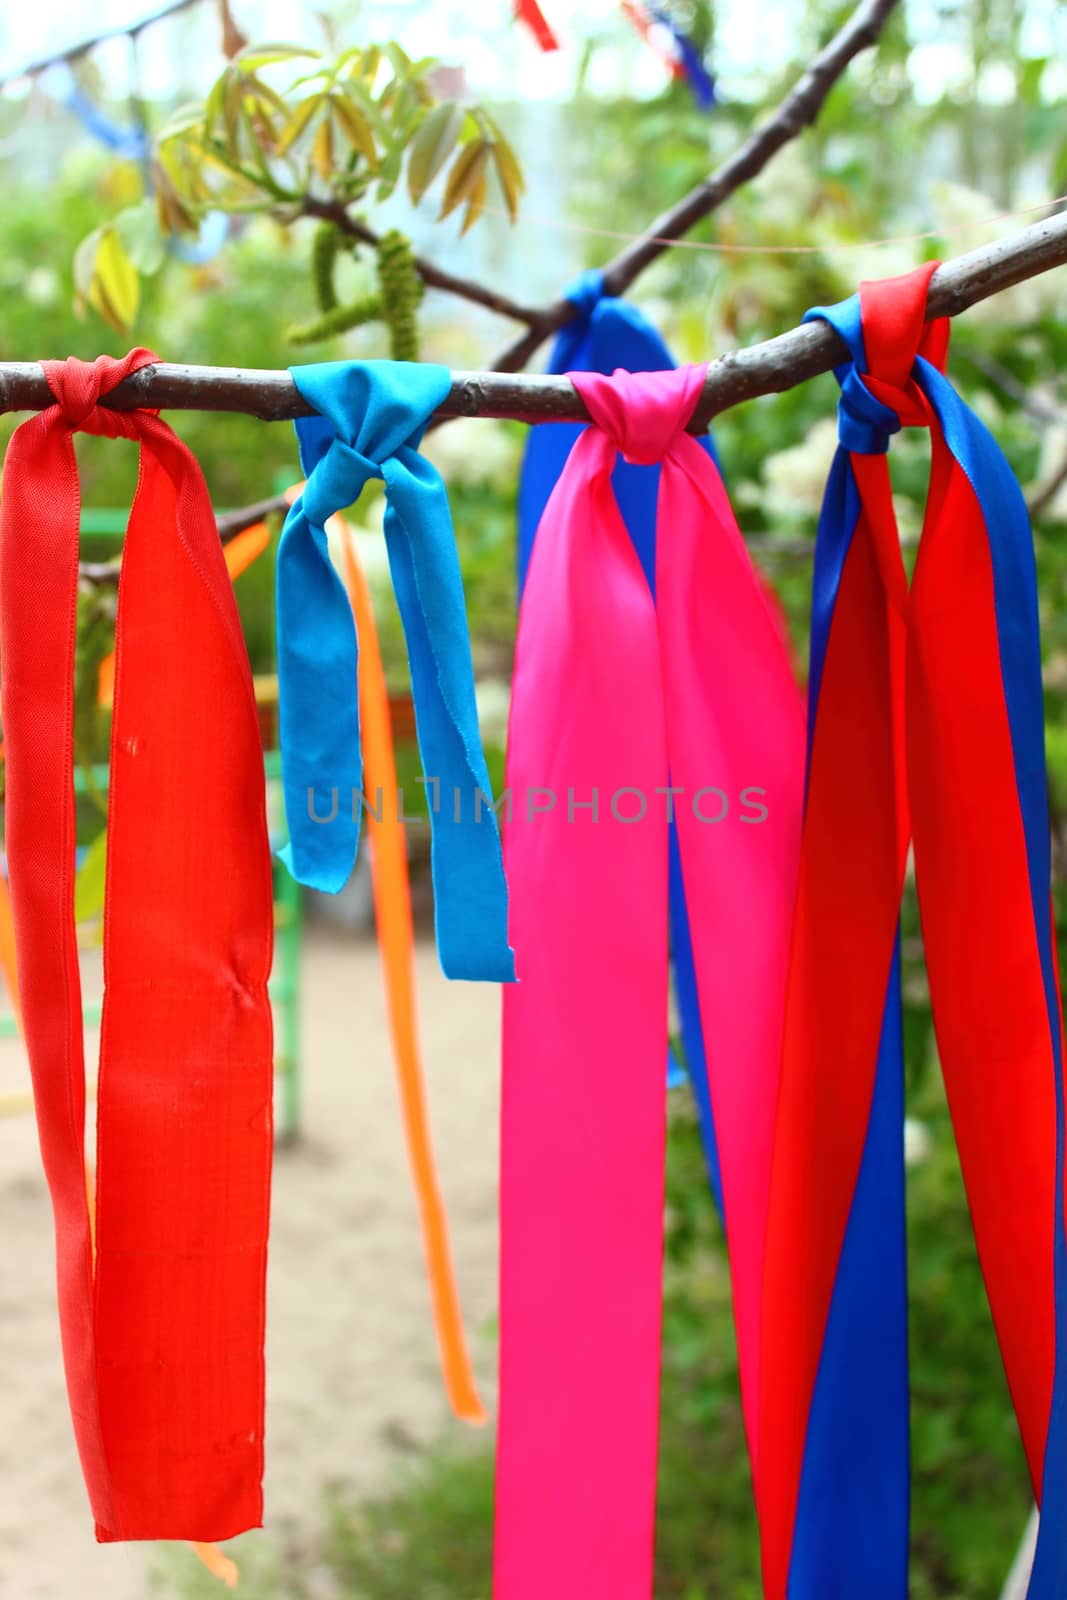 On a tree branch hanging silk ribbons: red, blue, blue, pink